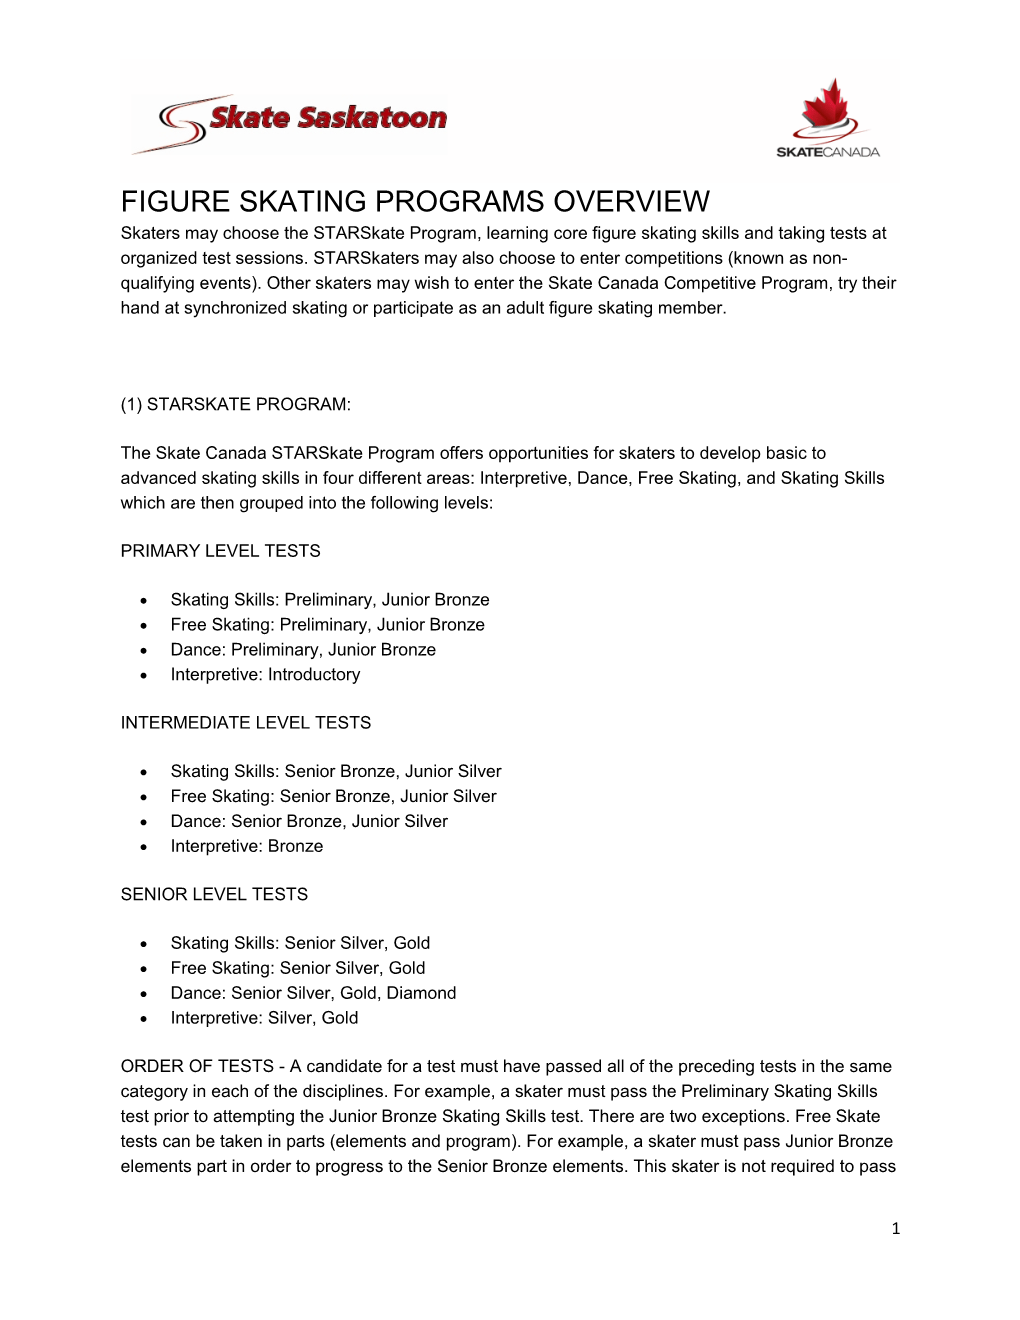 FIGURE SKATING PROGRAMS OVERVIEW Skaters May Choose the Starskate Program, Learning Core Figure Skating Skills and Taking Tests at Organized Test Sessions